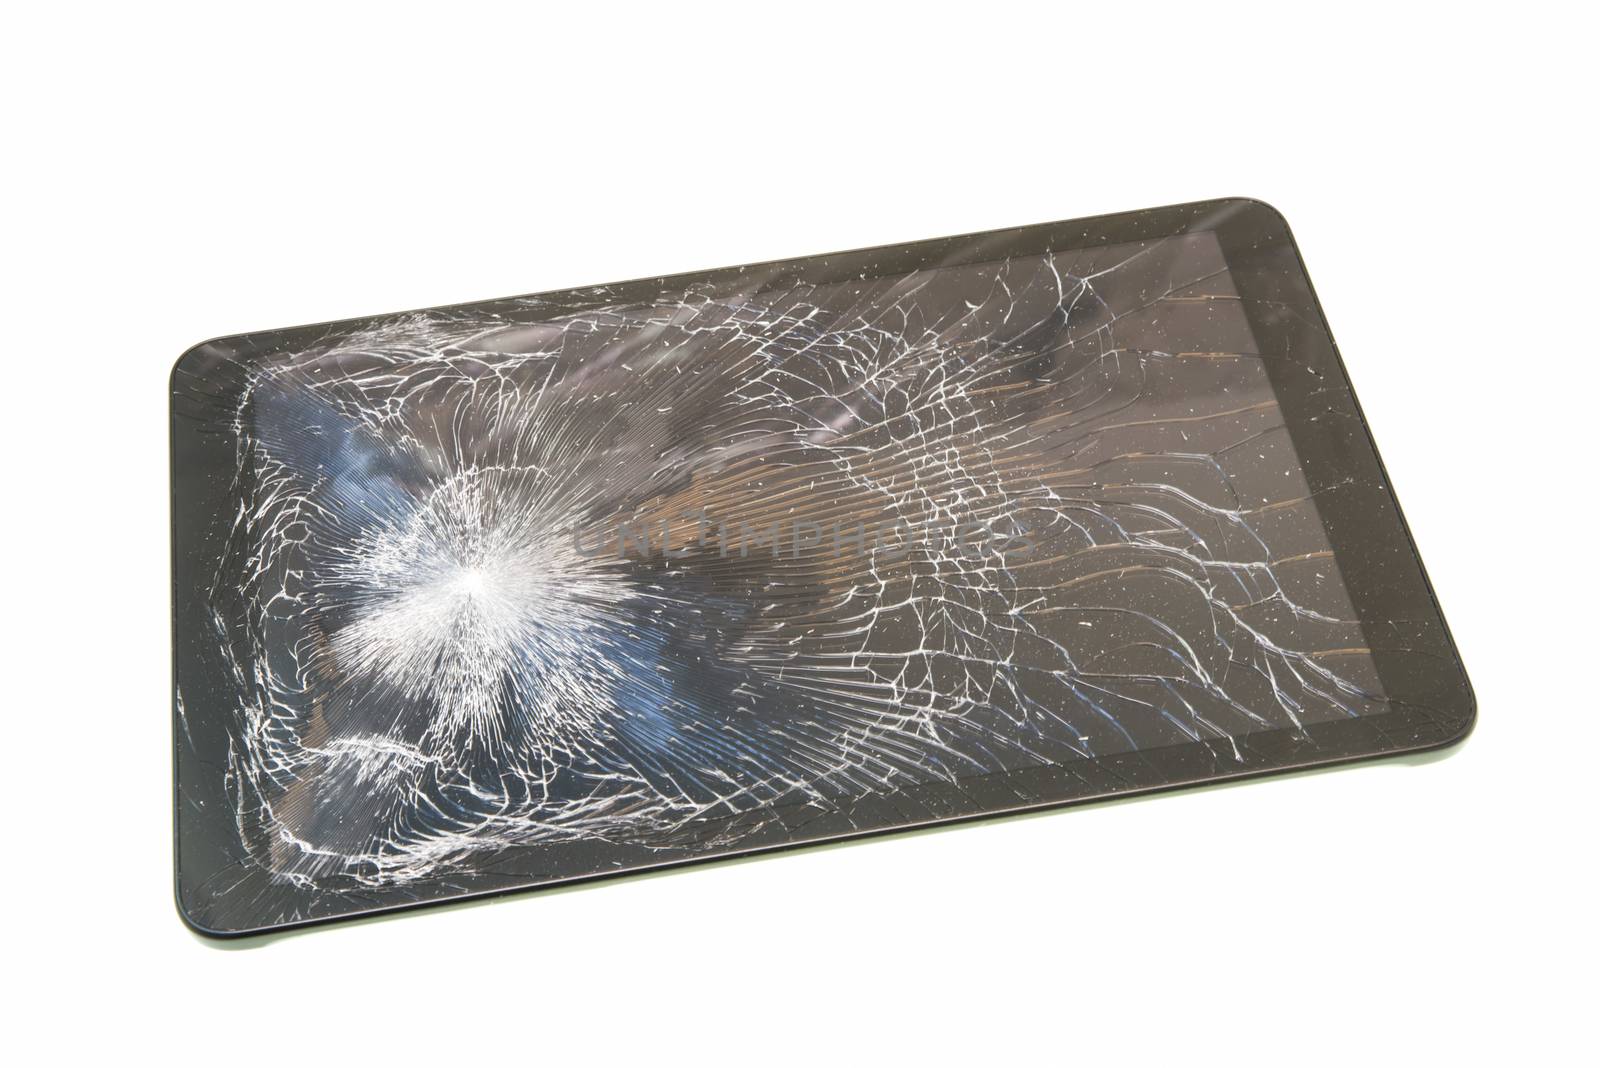 Tablet with cracked screen on a white background